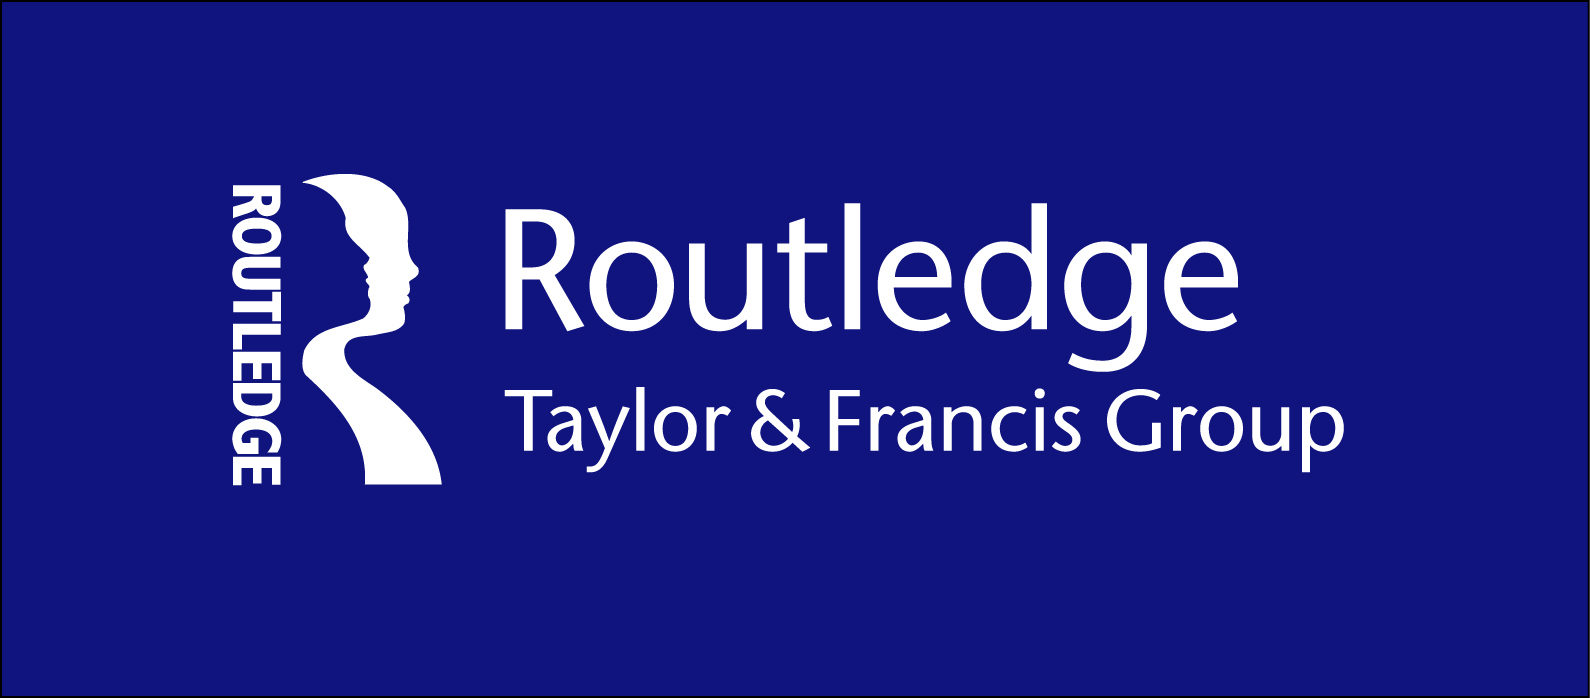 Routledge-Taylor & Francis Group logo